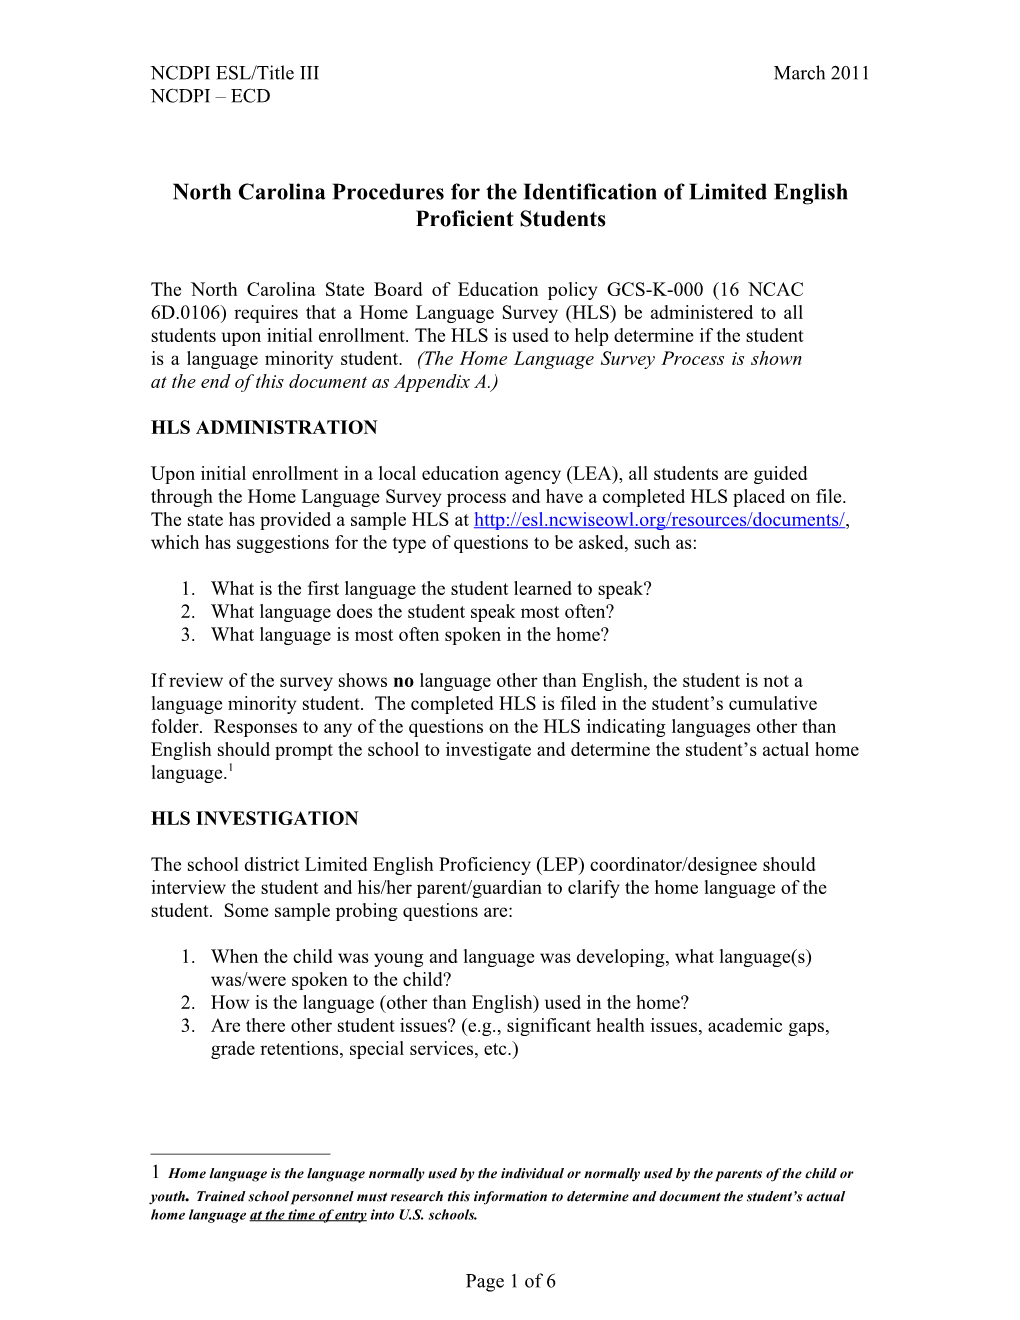 North Carolina Procedures for the Identification of Limited English Proficient Students